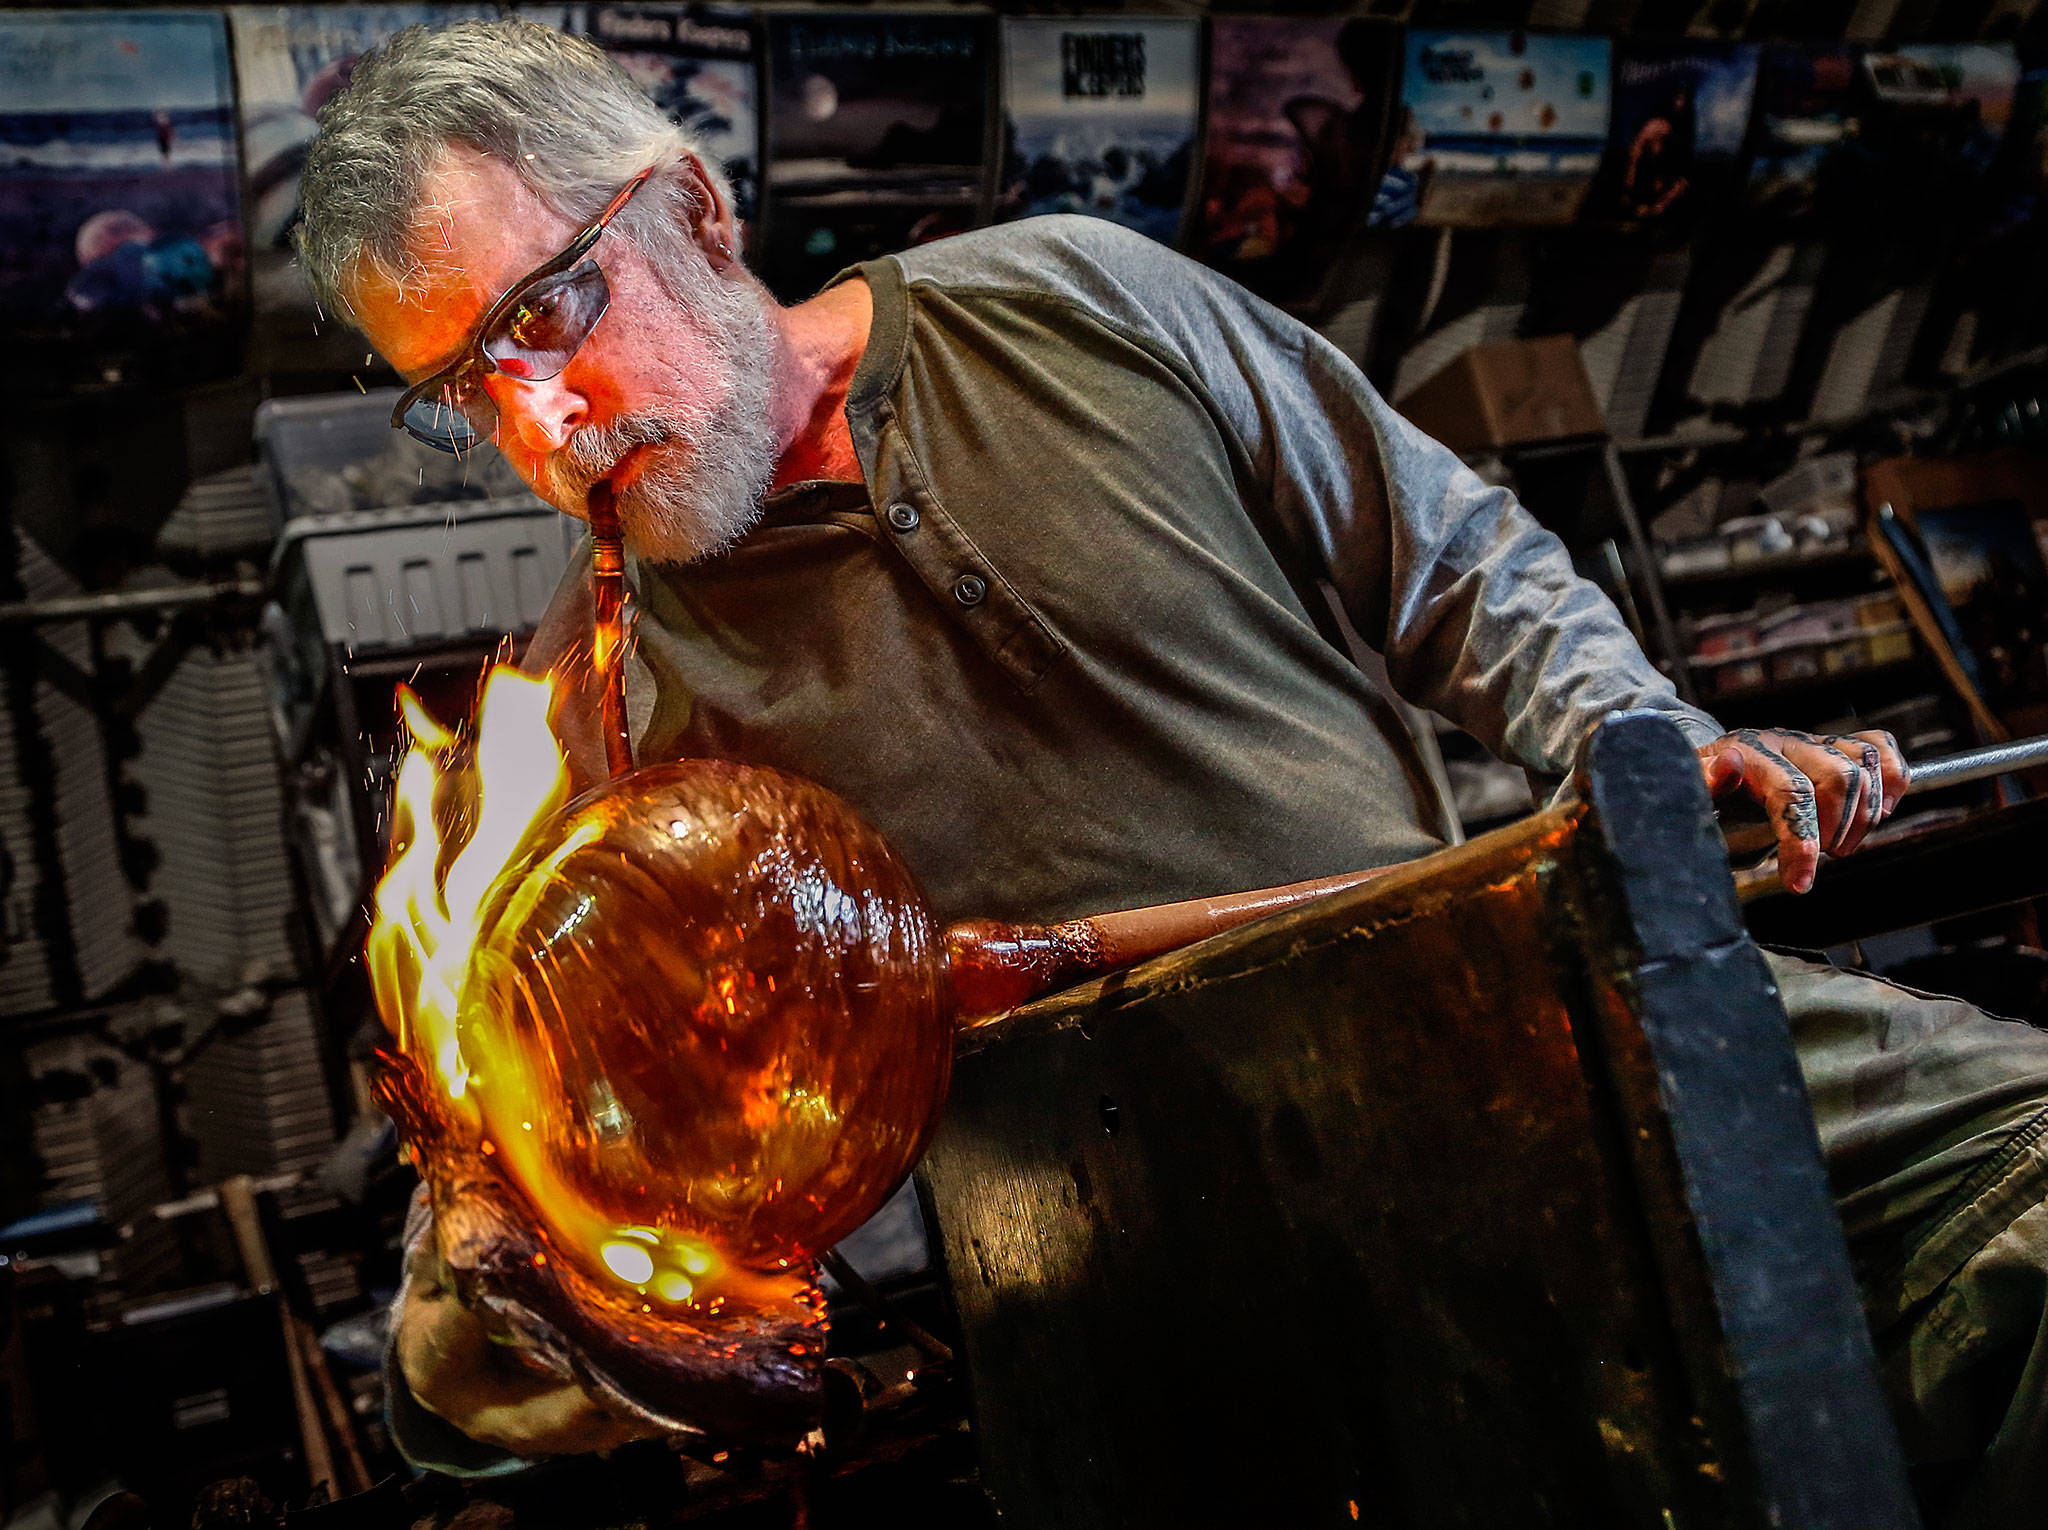 Mark Ellinger works to create unique texture and color on a glass float. He and his son made hundreds of floats for this year’s Great Northwest Glass Quest. (Dan Bates / The Herald)